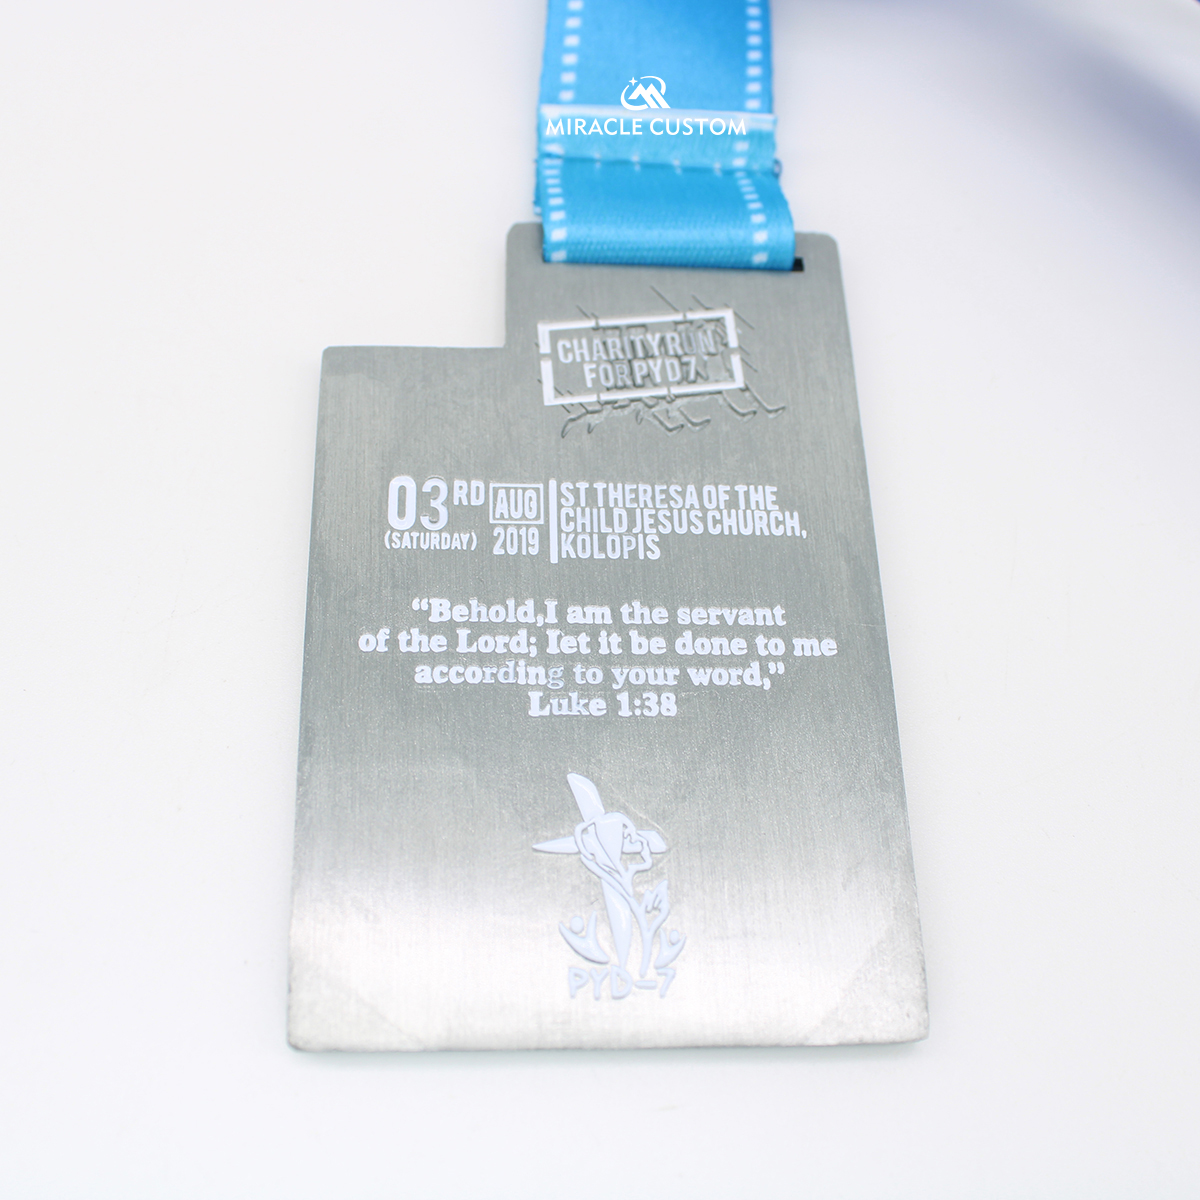 Custom Charity Run For PYD7 8KM Finisher Medals